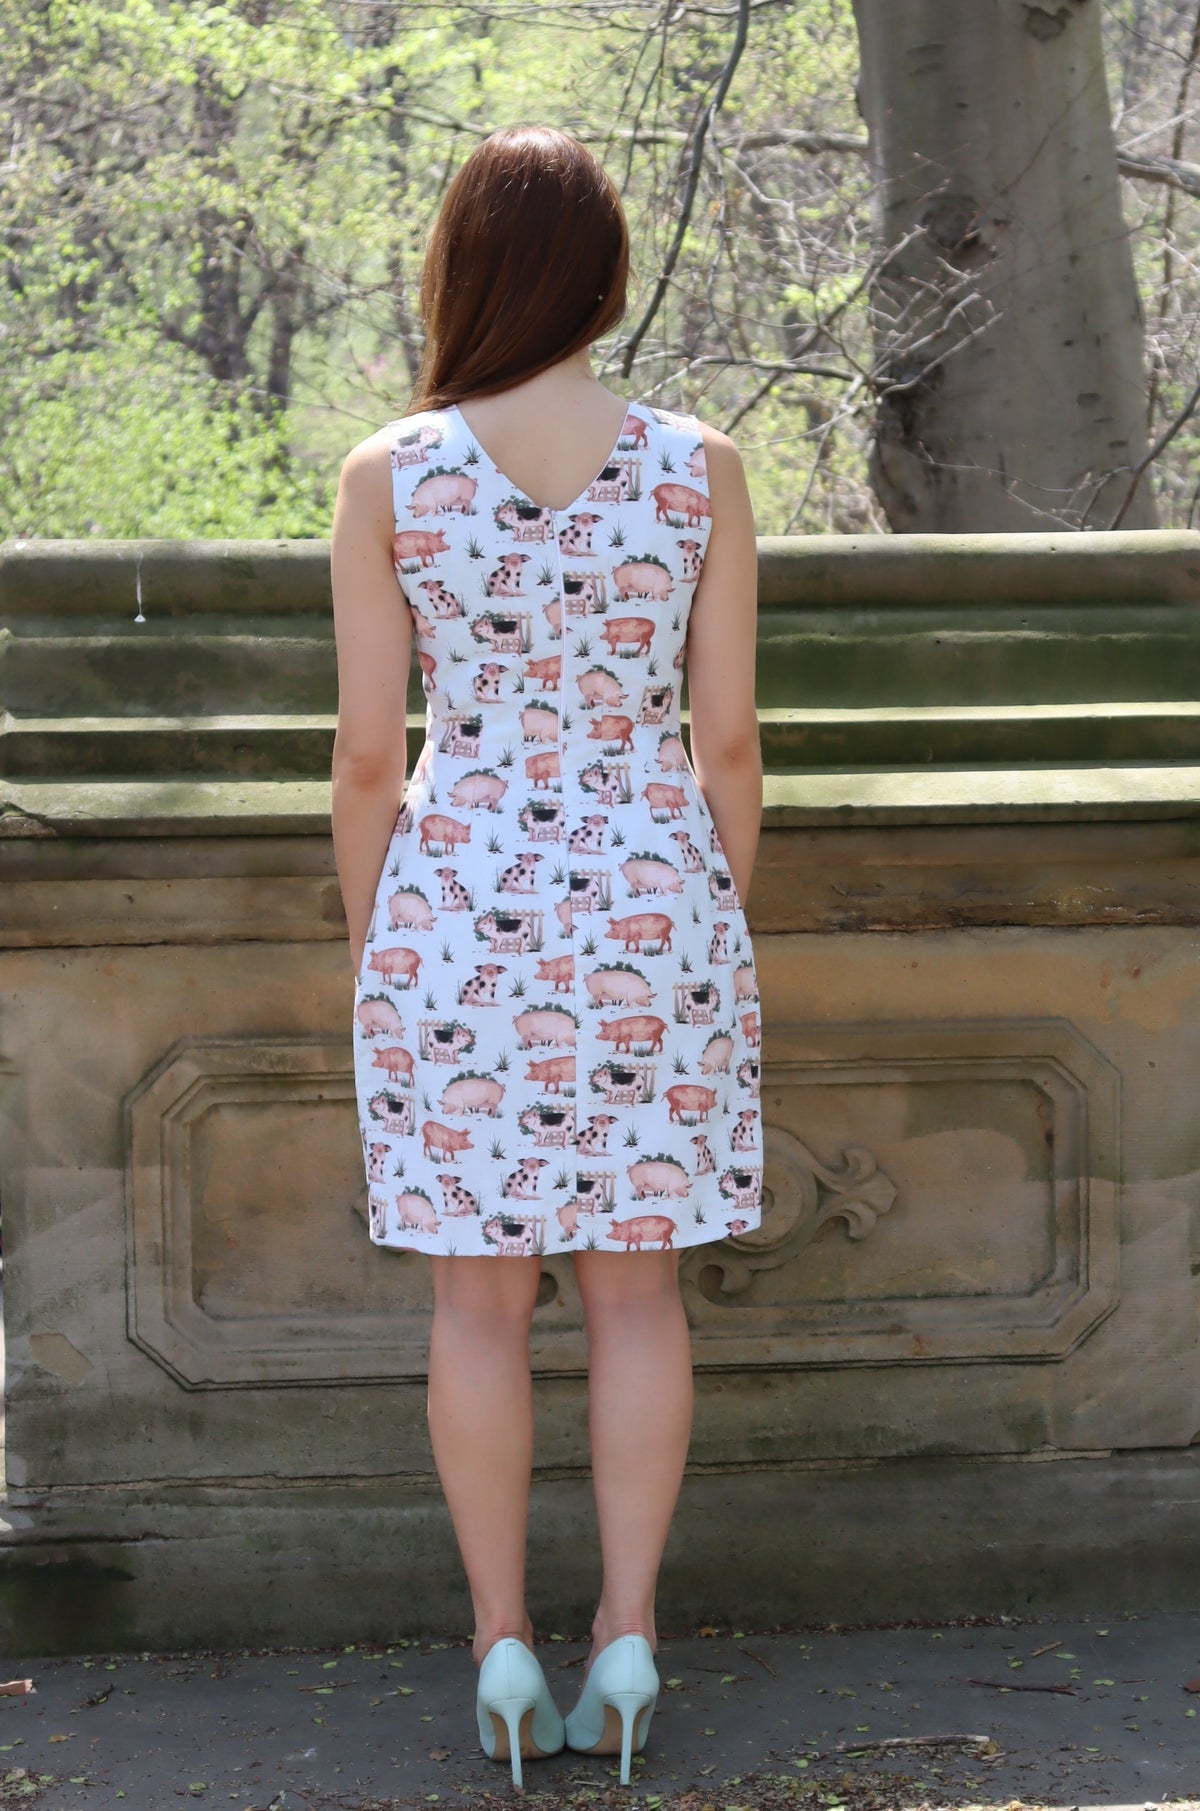 Back view of Model wearing short pig print dress leaning against a stone balustrade.